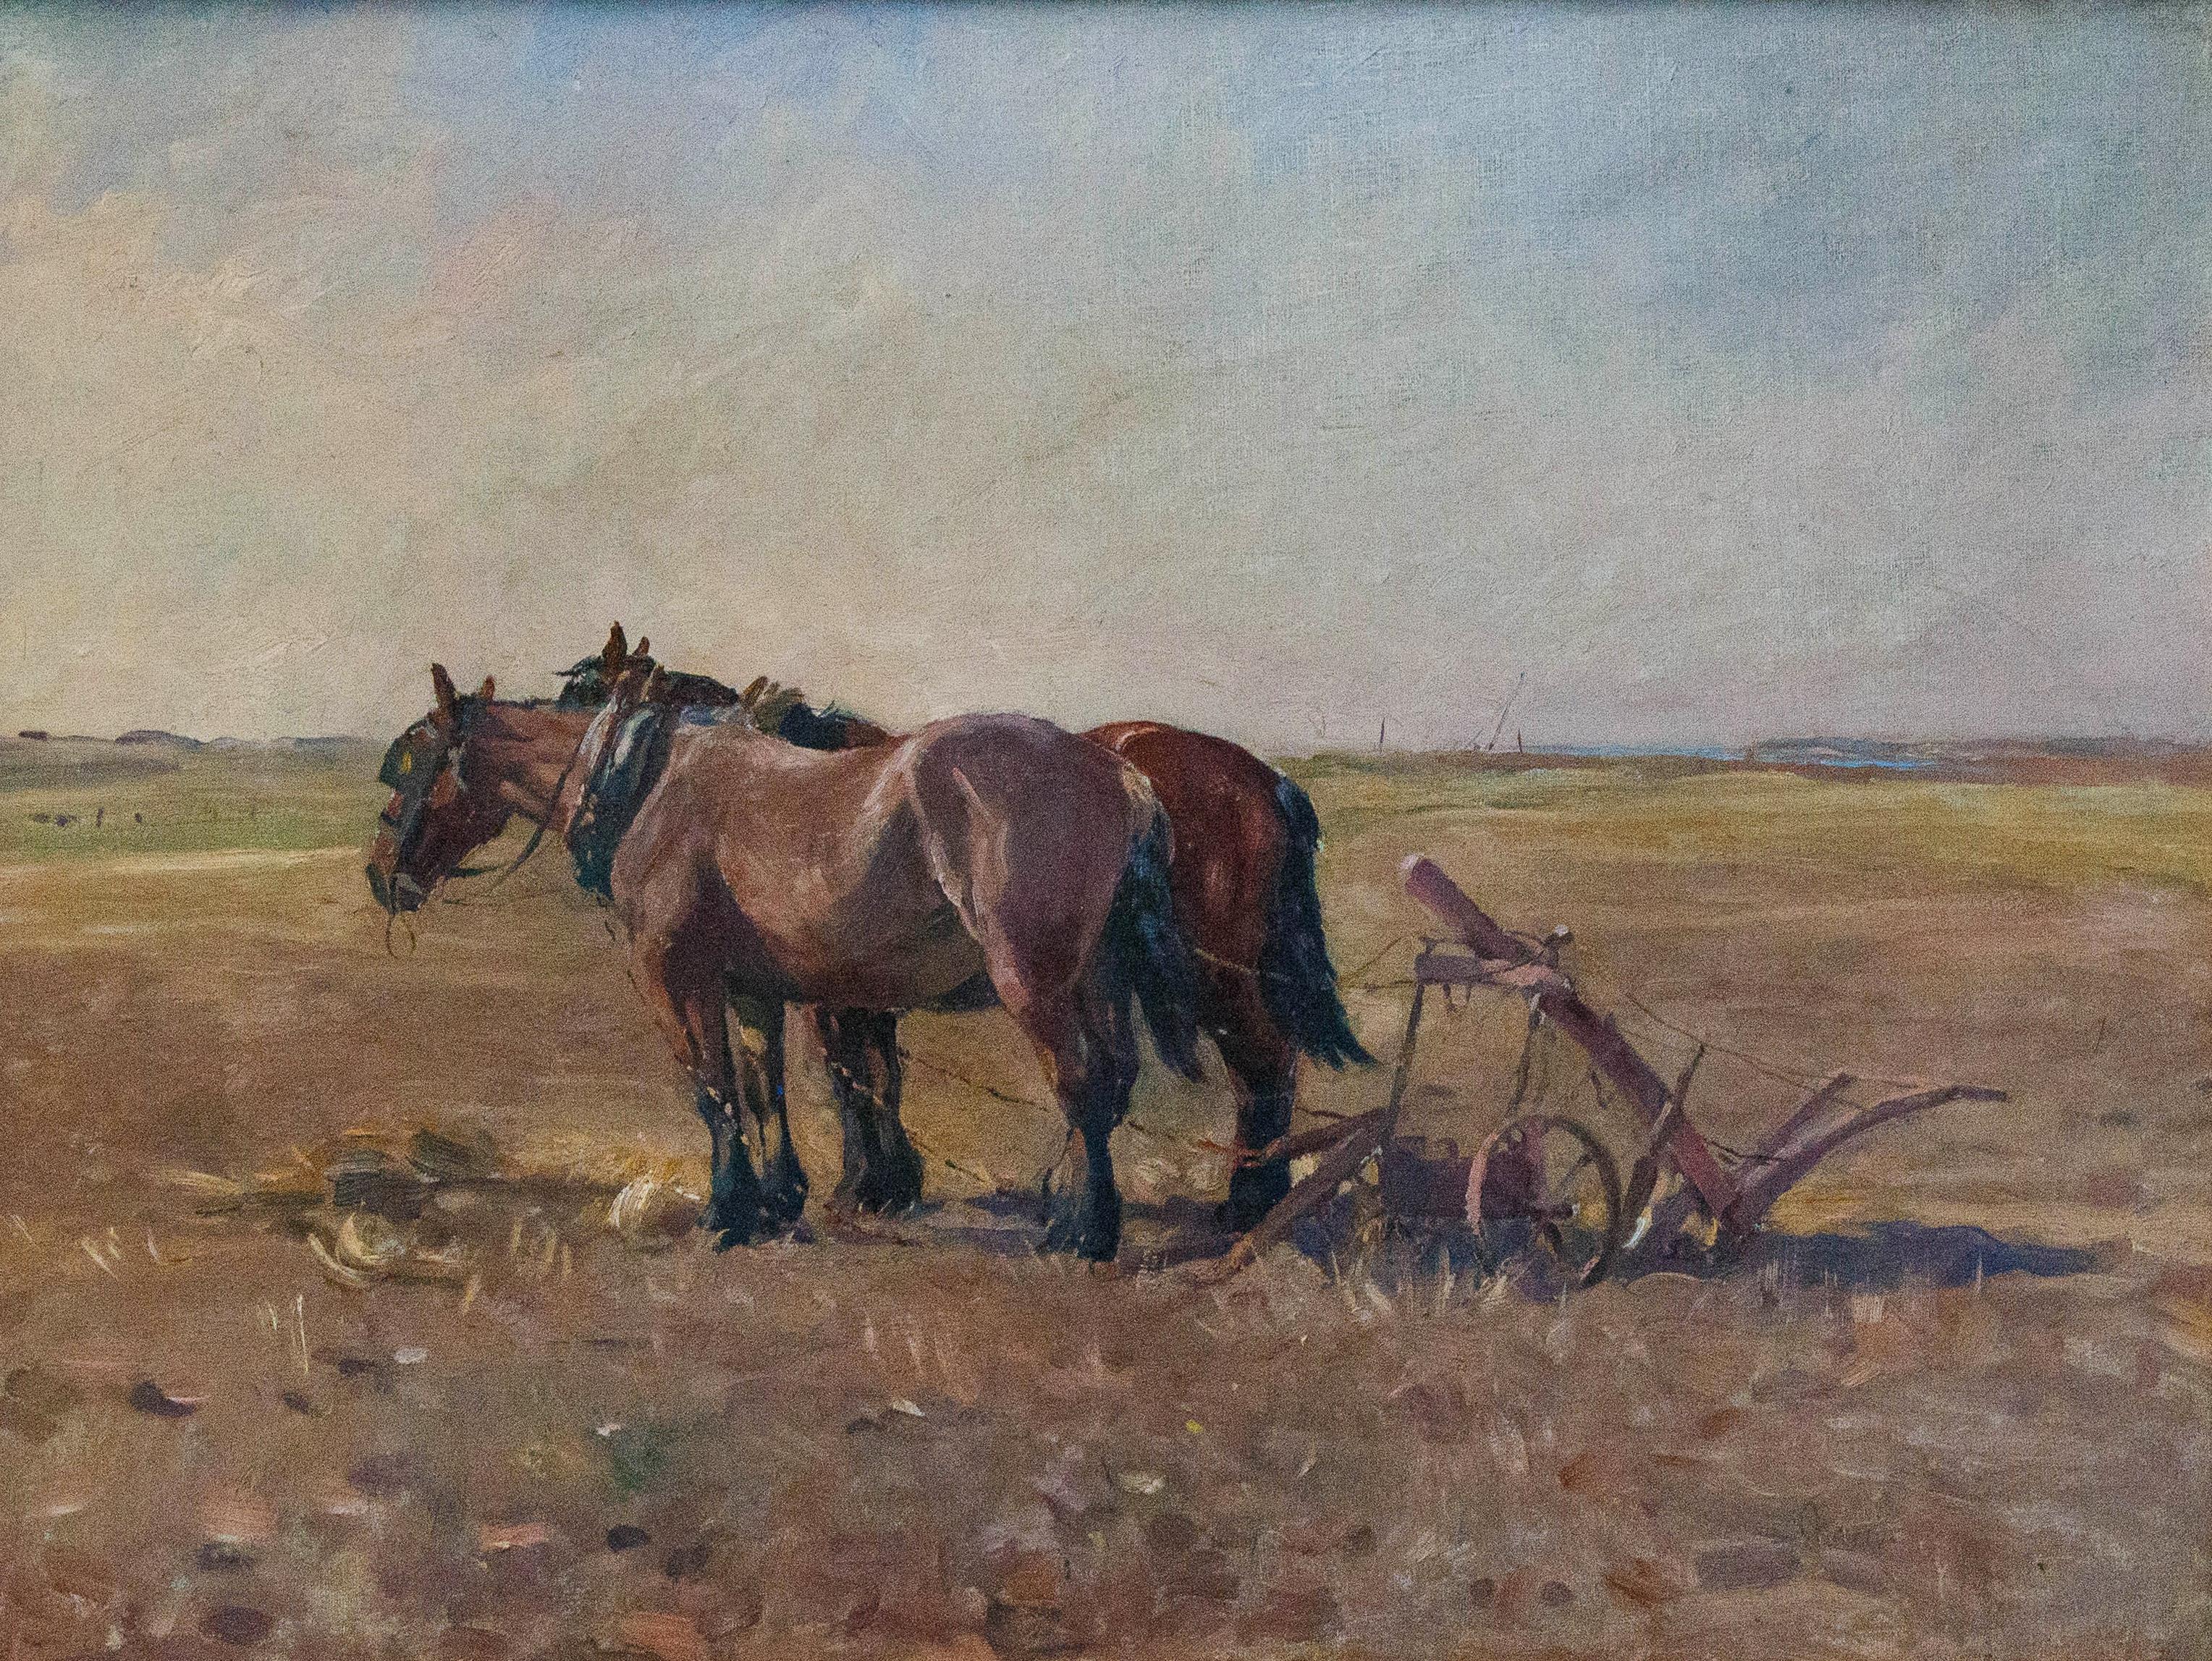 Ploughing the fields - Realist Painting by Unknown